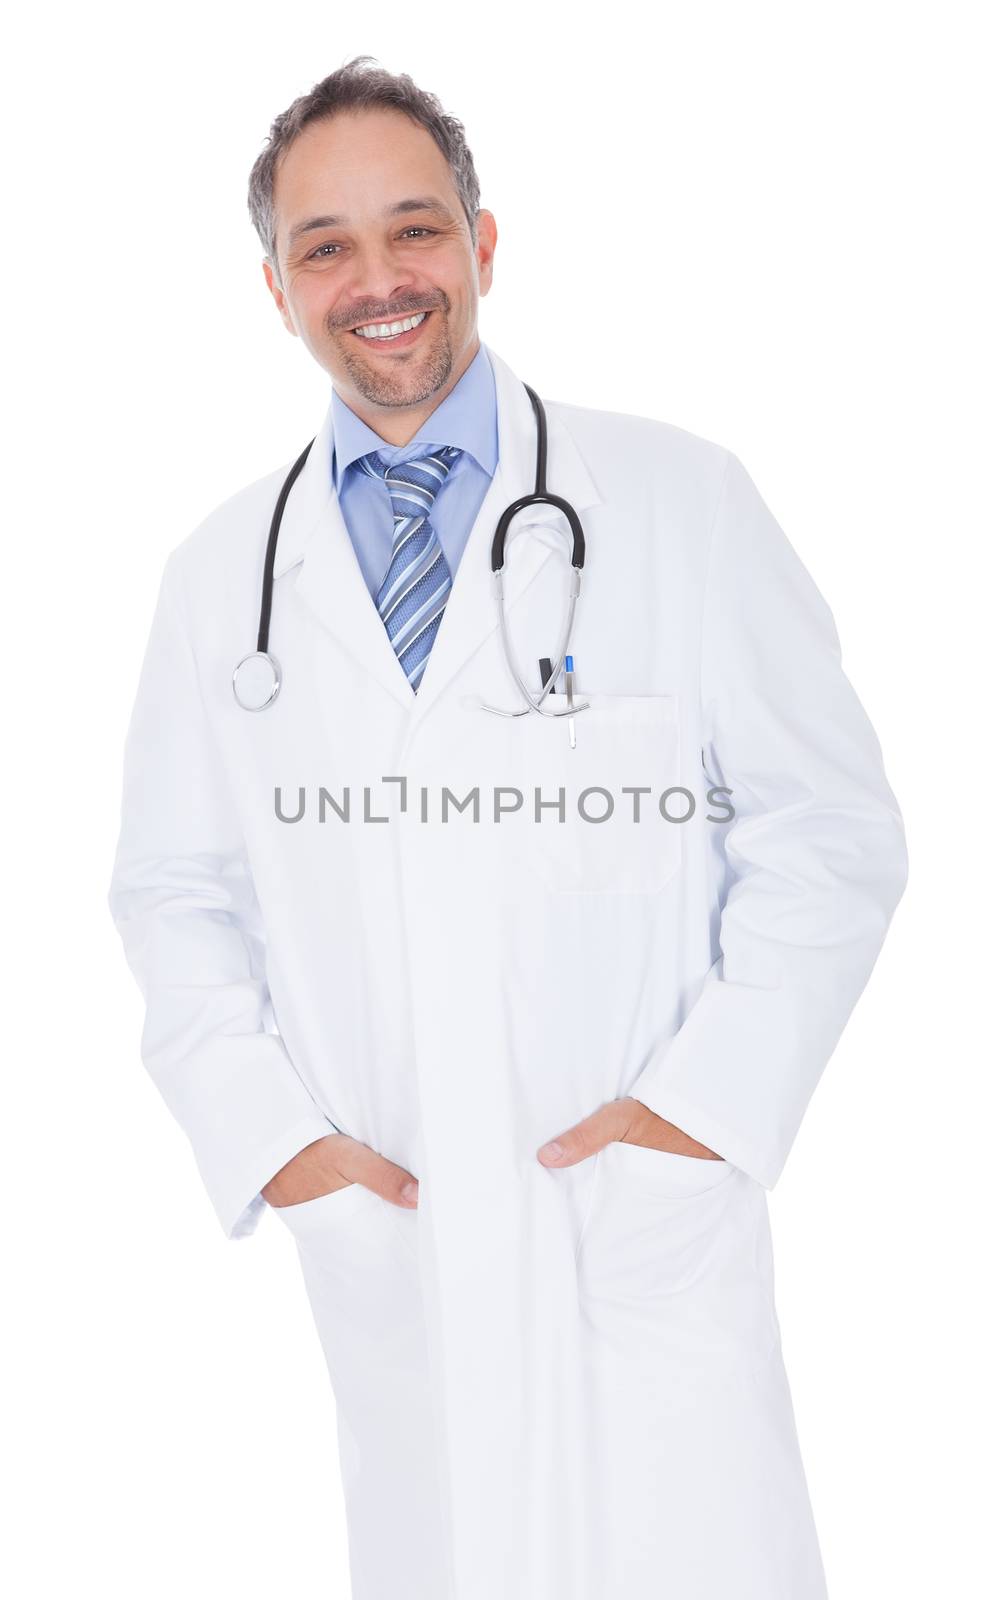 Smiling medical doctor man with stethoscope. Isolated on white